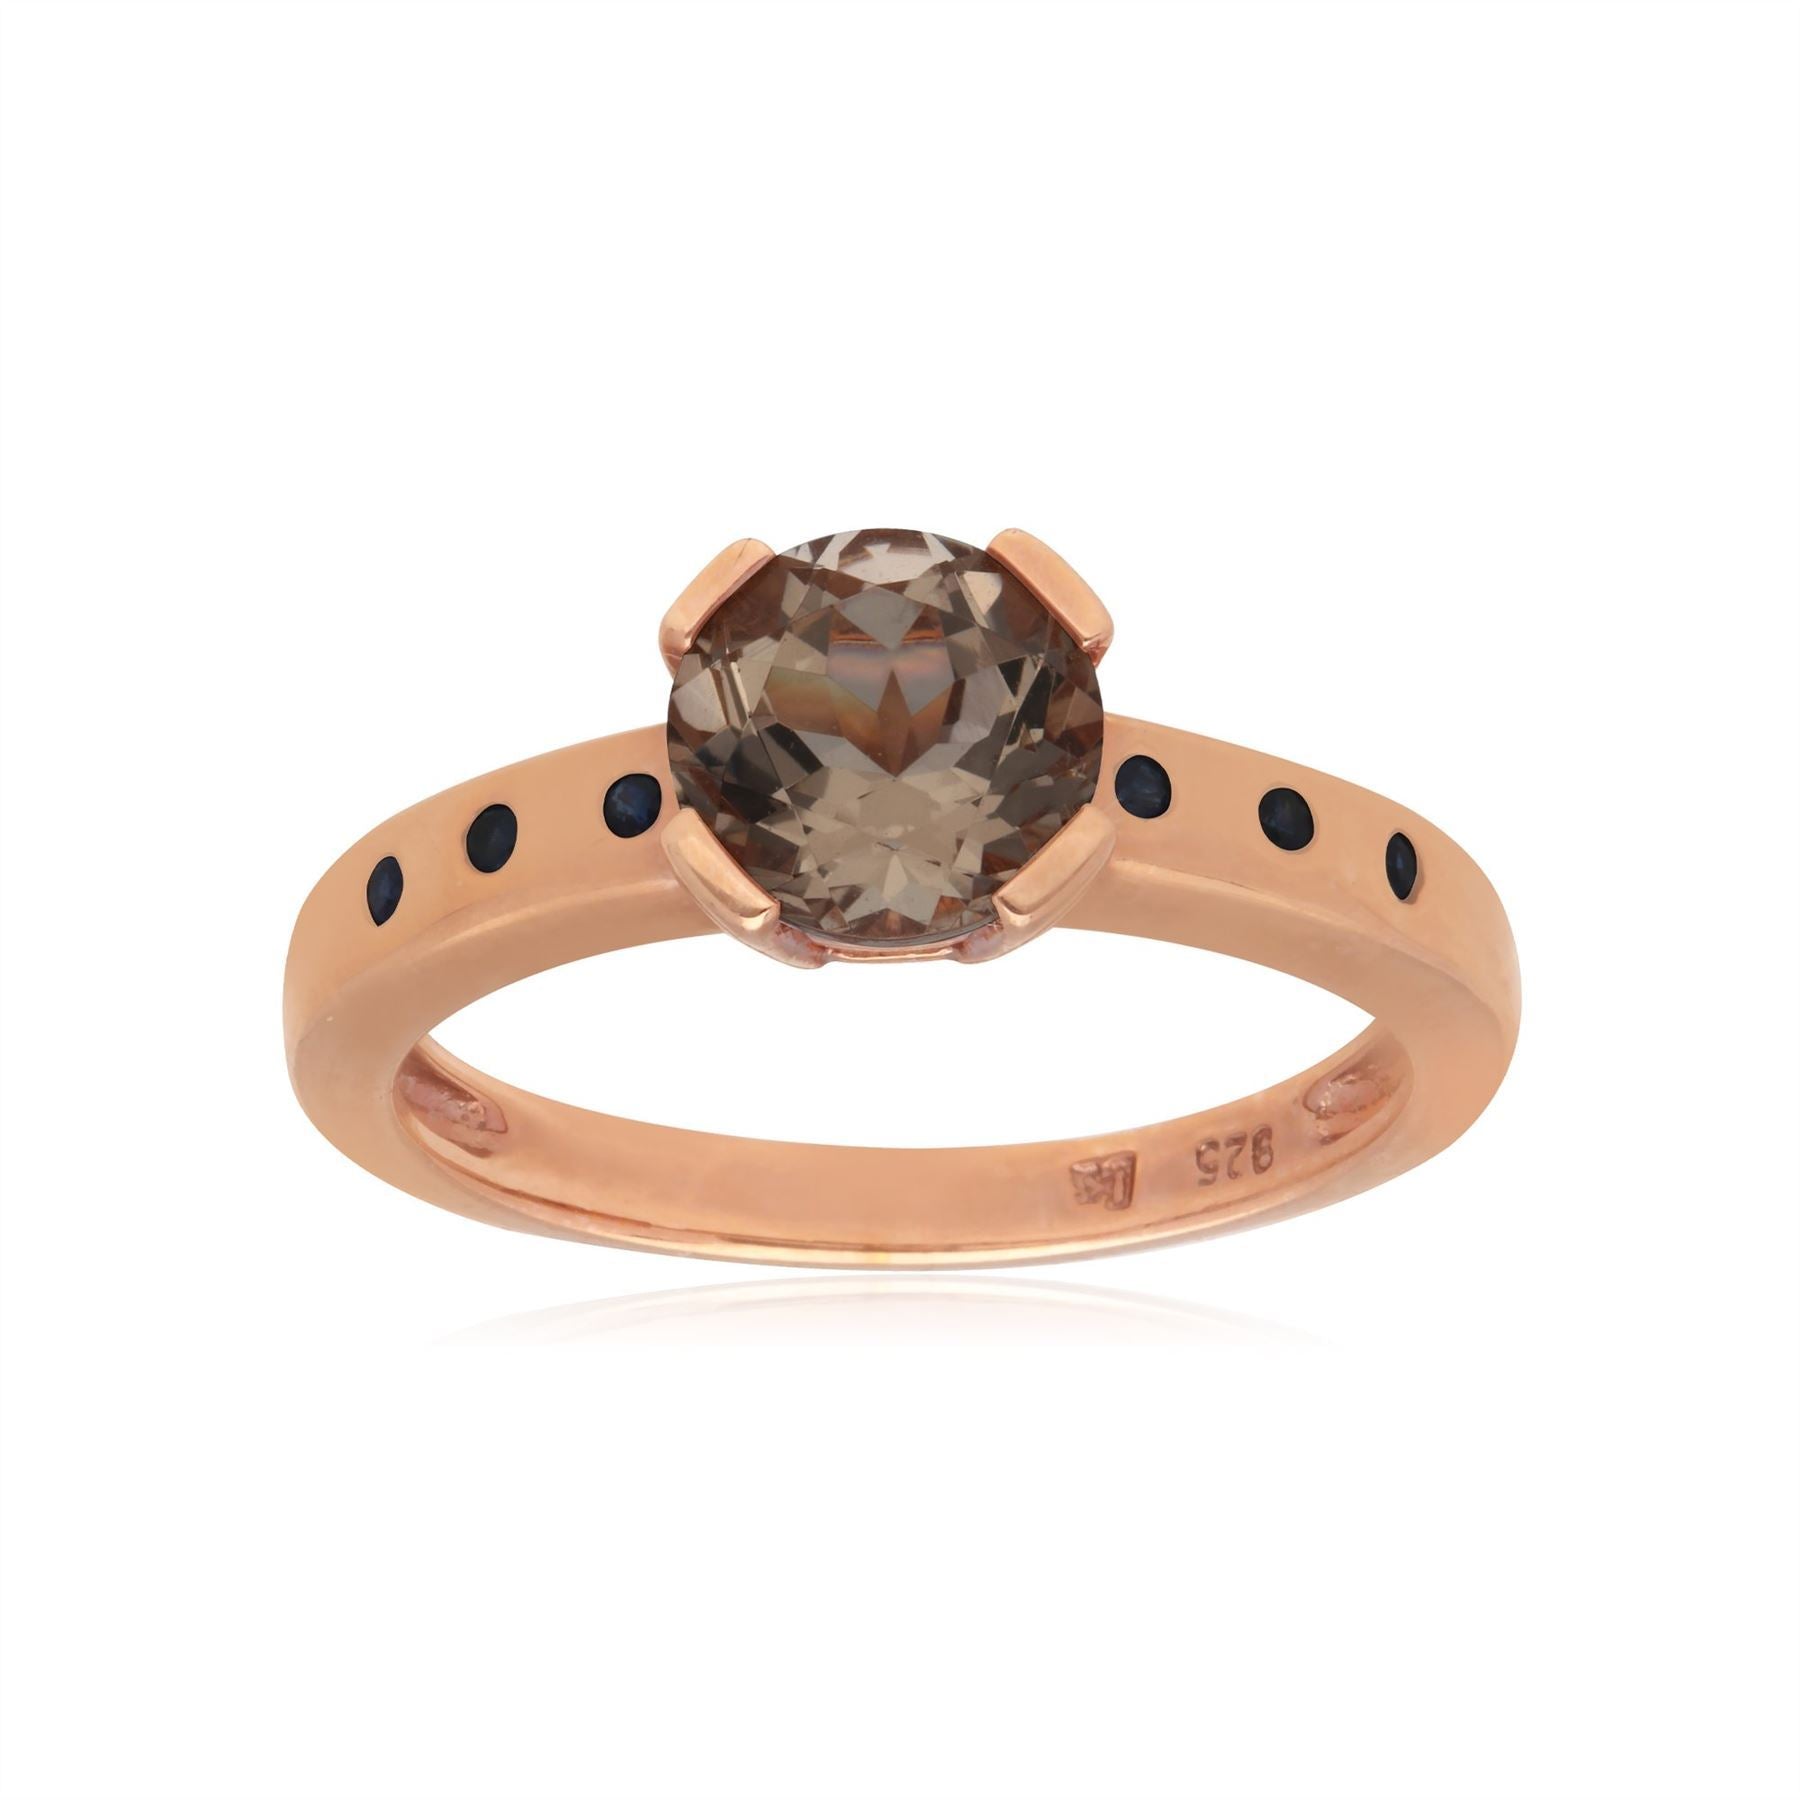 Kosmos Morganite Cocktail Ring in Rose Gold Plated Sterling Silver